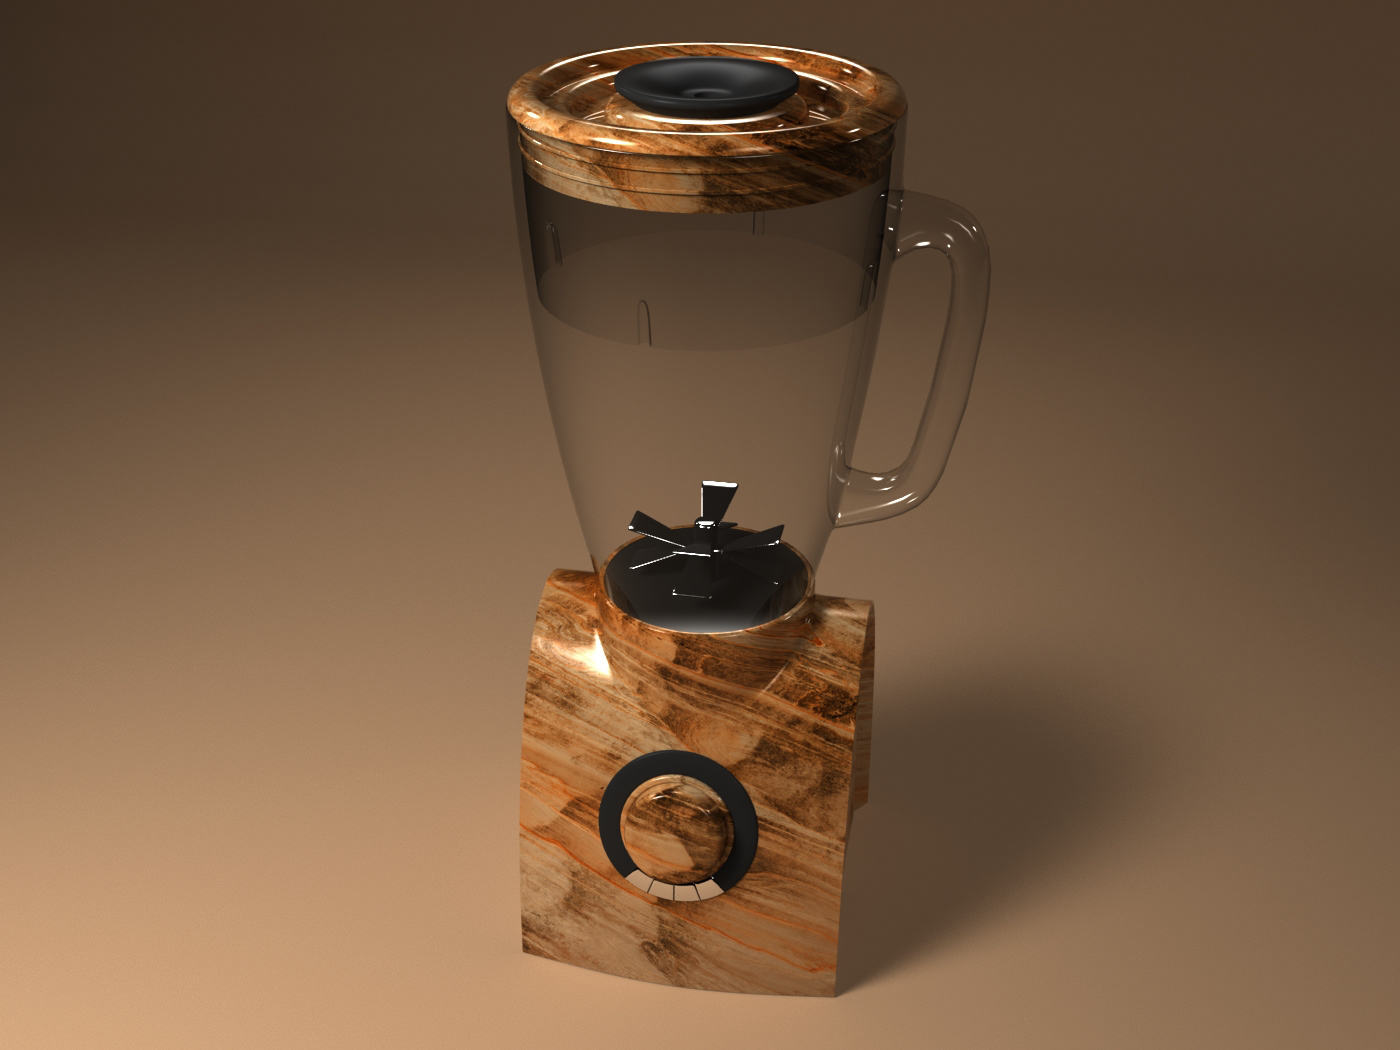 3ds max industrial design  Product Display Render